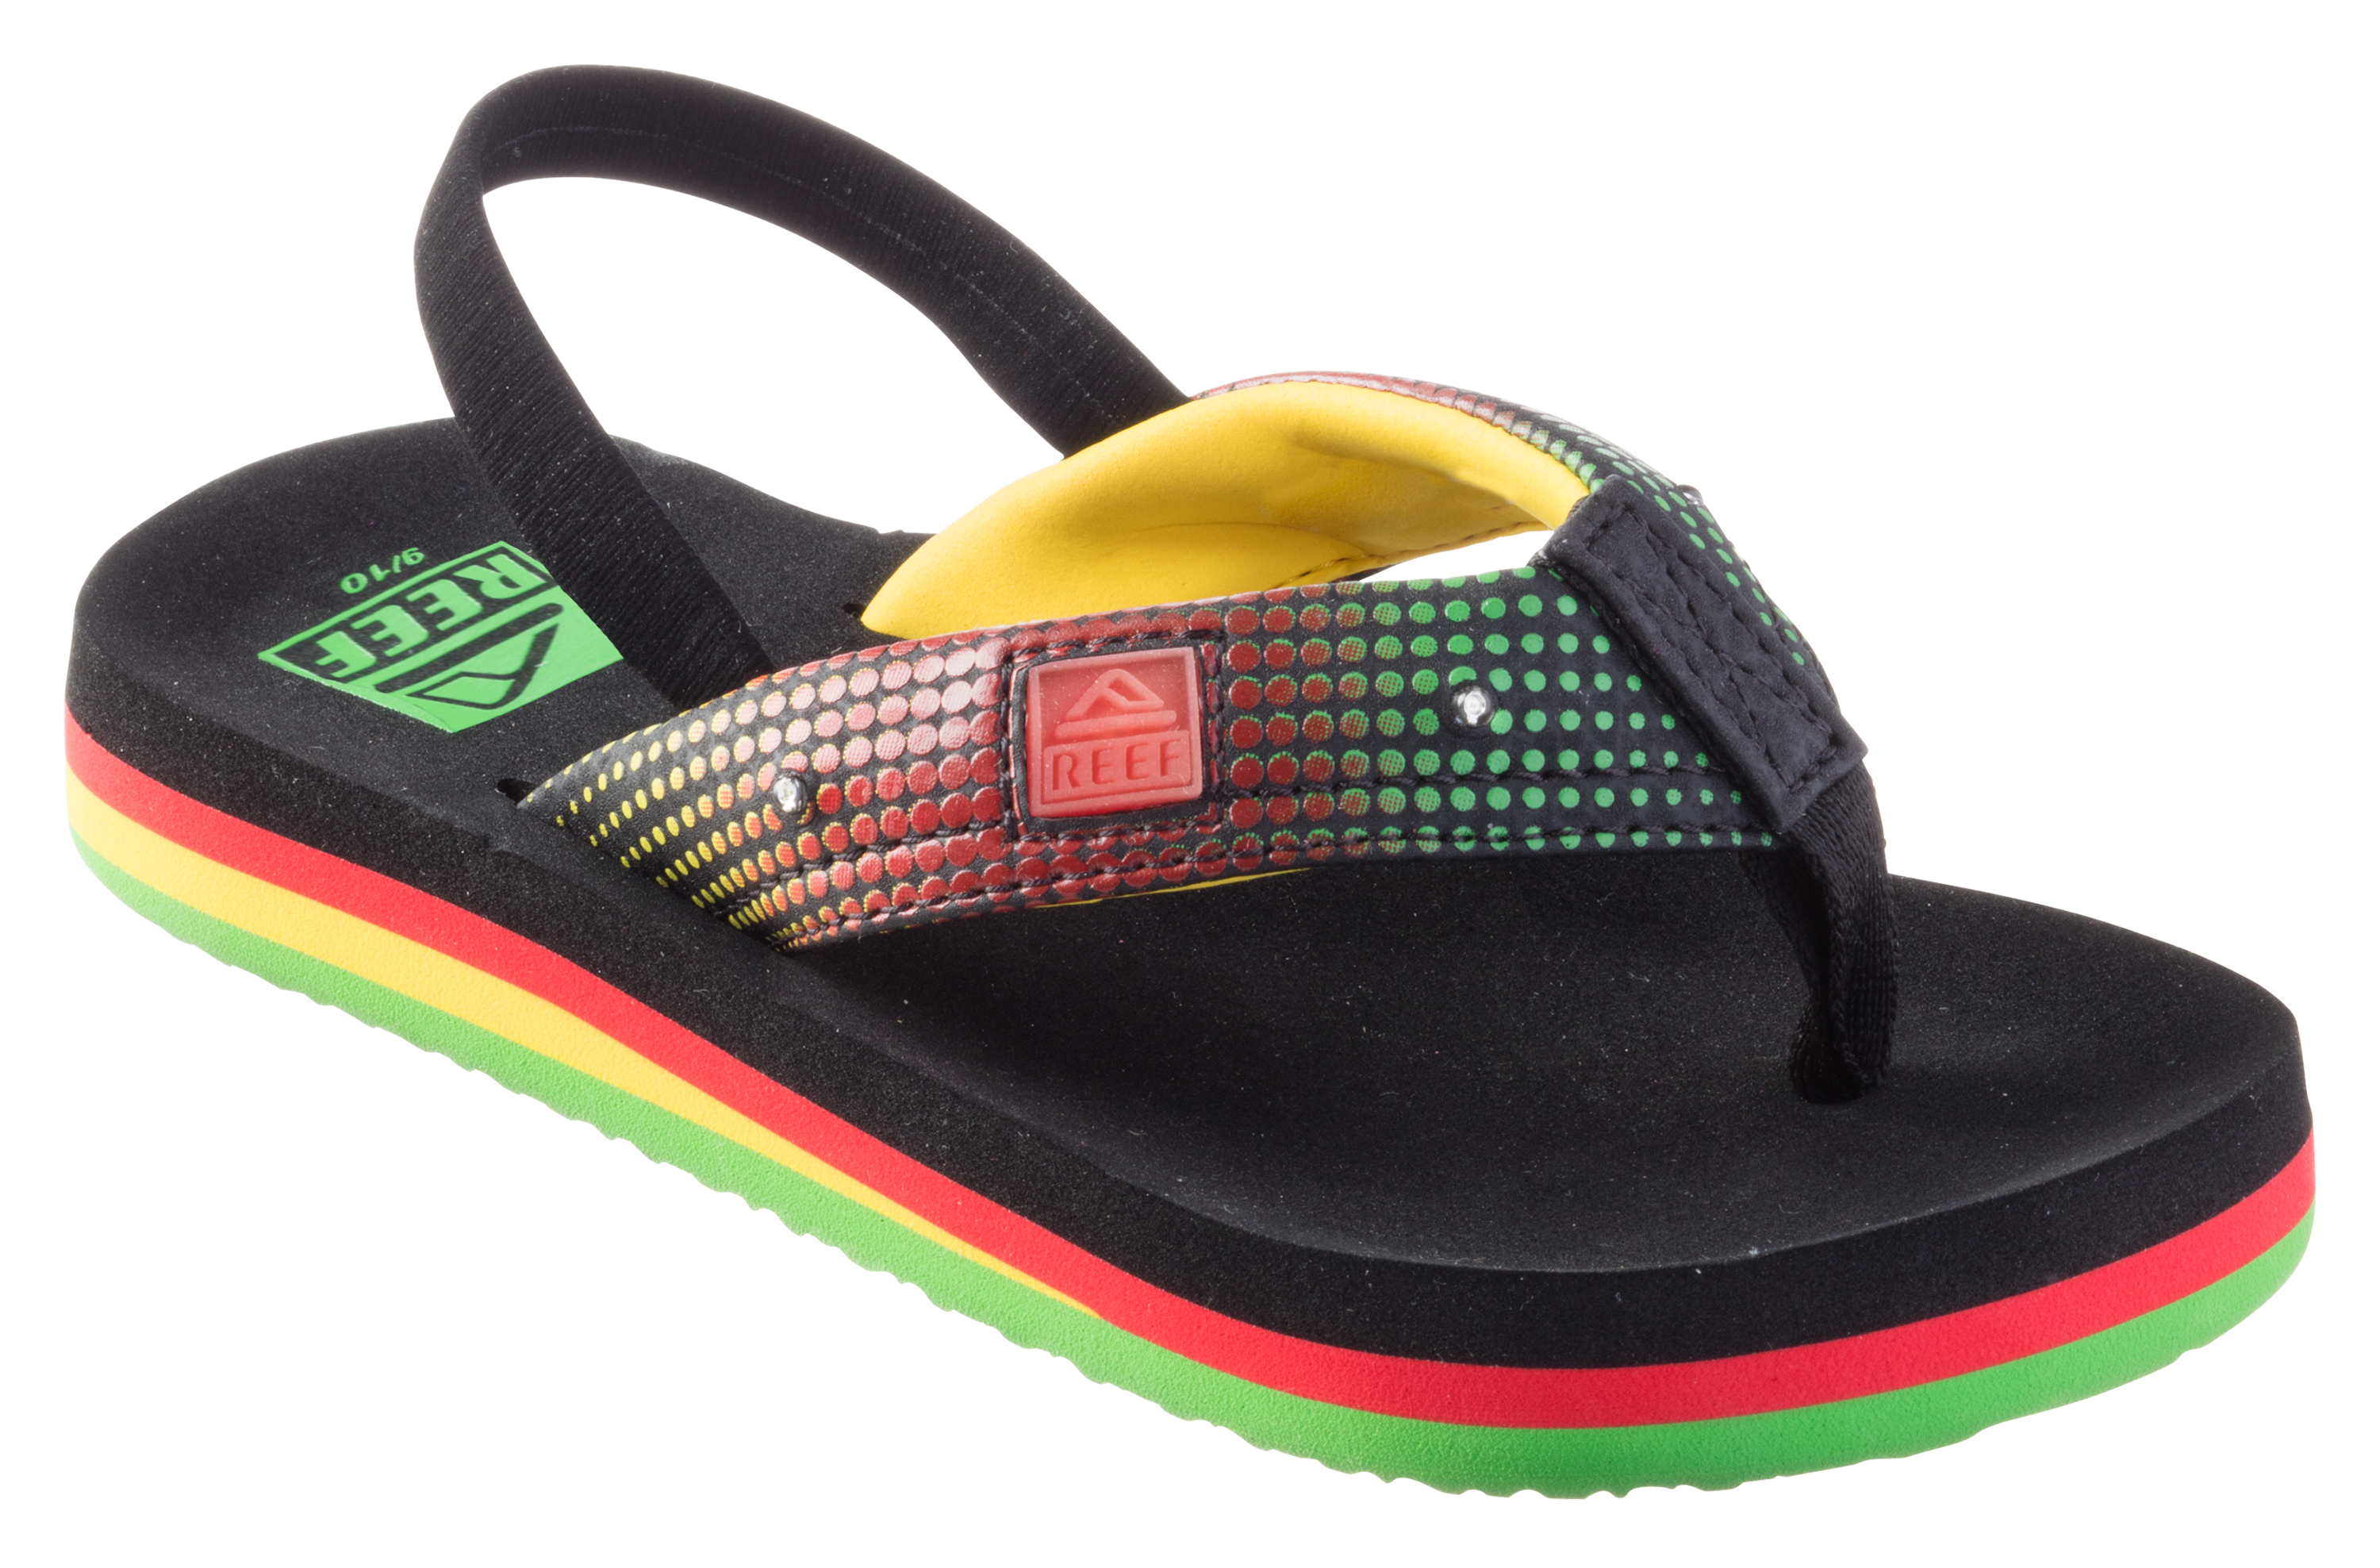 Reef Ahi Light Up Prints Sandals for Babies, Toddlers, or Kids | Bass ...